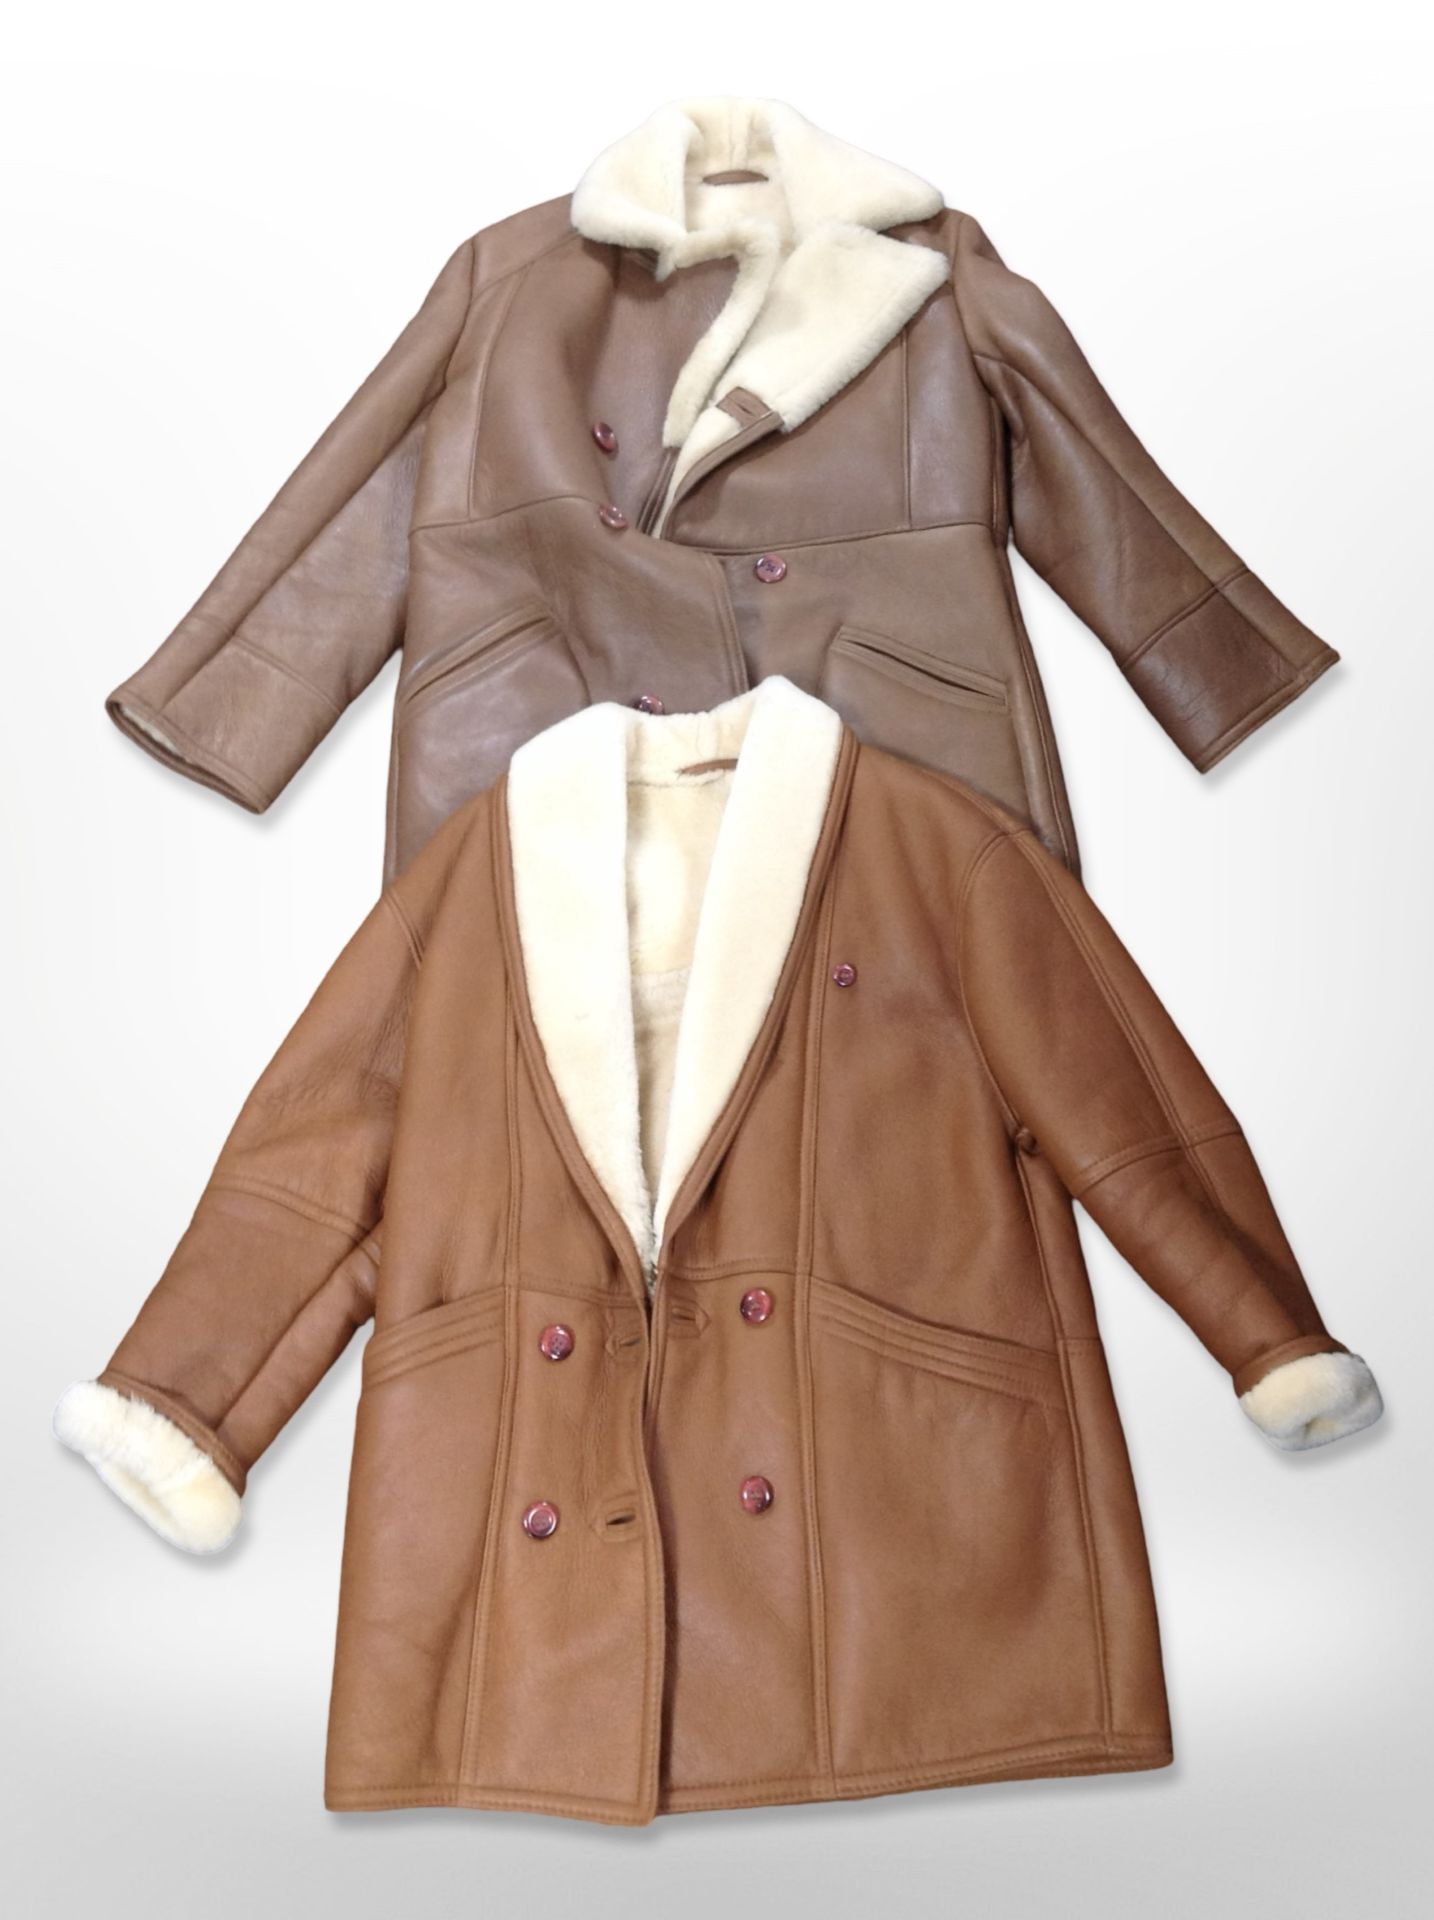 Two Country Coats tan leather and sheepskin-lined coats, one labelled size 40,